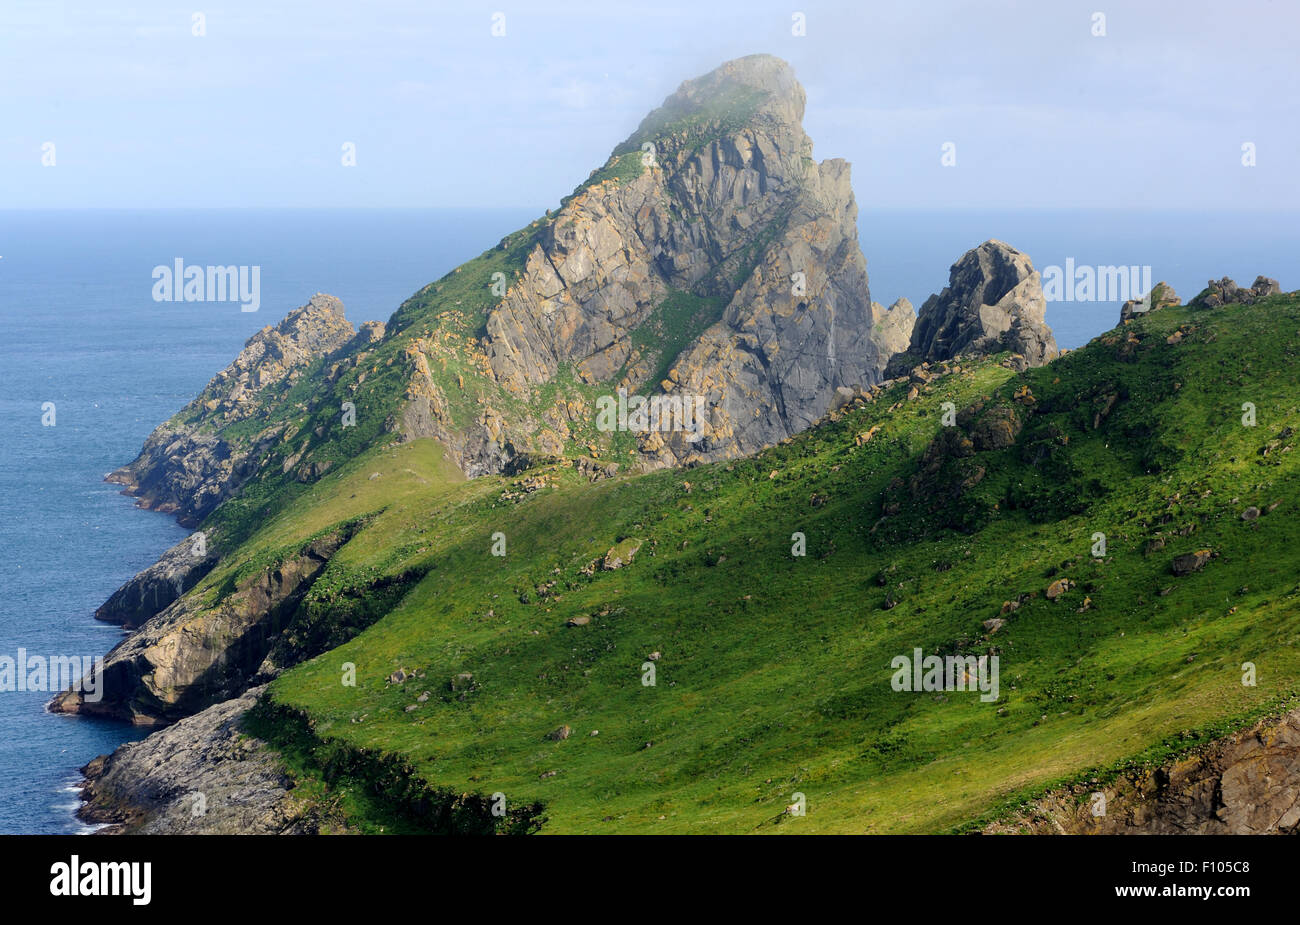 The island of Dun from the southern point of Hirta. These two islands are part of the St Kilda archipelago.  Hirta, St Kilda, Stock Photo